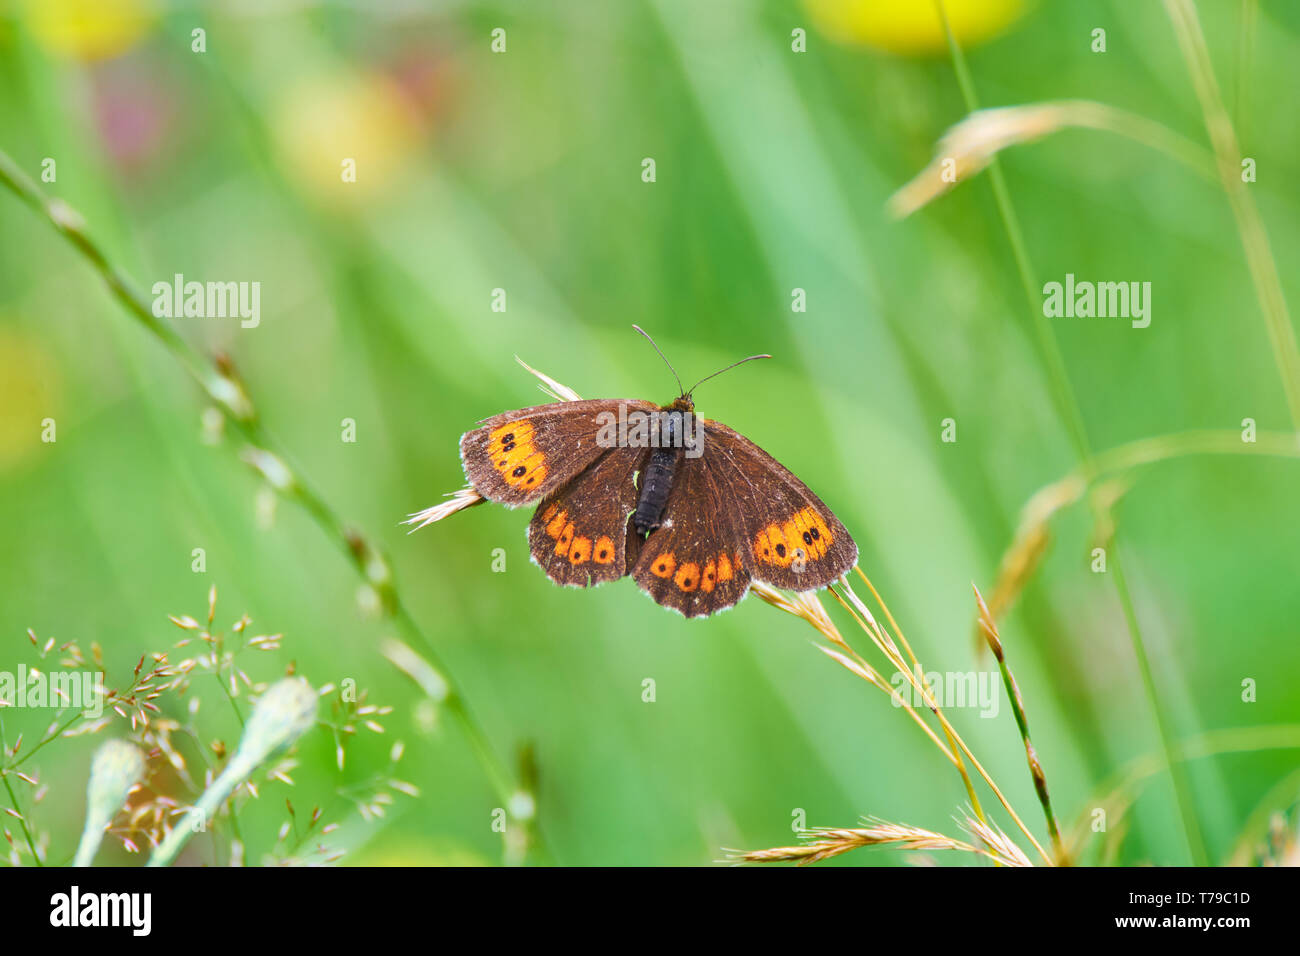 Brown butterfly on a green background Stock Photo